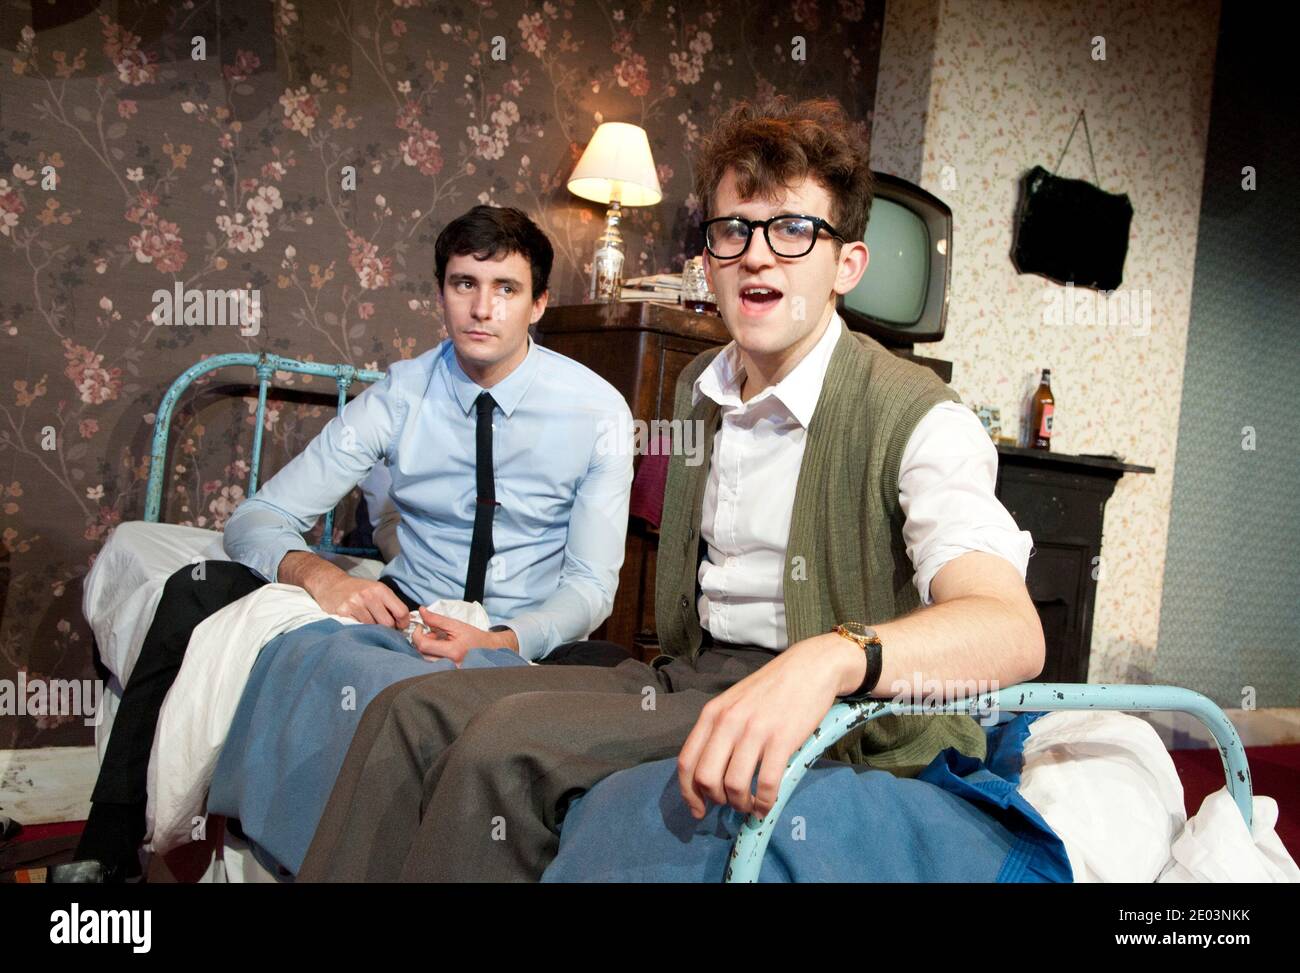 l-r: Sam Swainsbury (Jimmy), Harry Melling (Ian) in WHEN DID YOU LAST SEE MY MOTHER? by Christopher Hampton at Trafalgar Studios 2, London SW1  16/09/2011  design: Nicky Bunch  lighting: Greg Gould  director: Blanche McIntyre Stock Photo